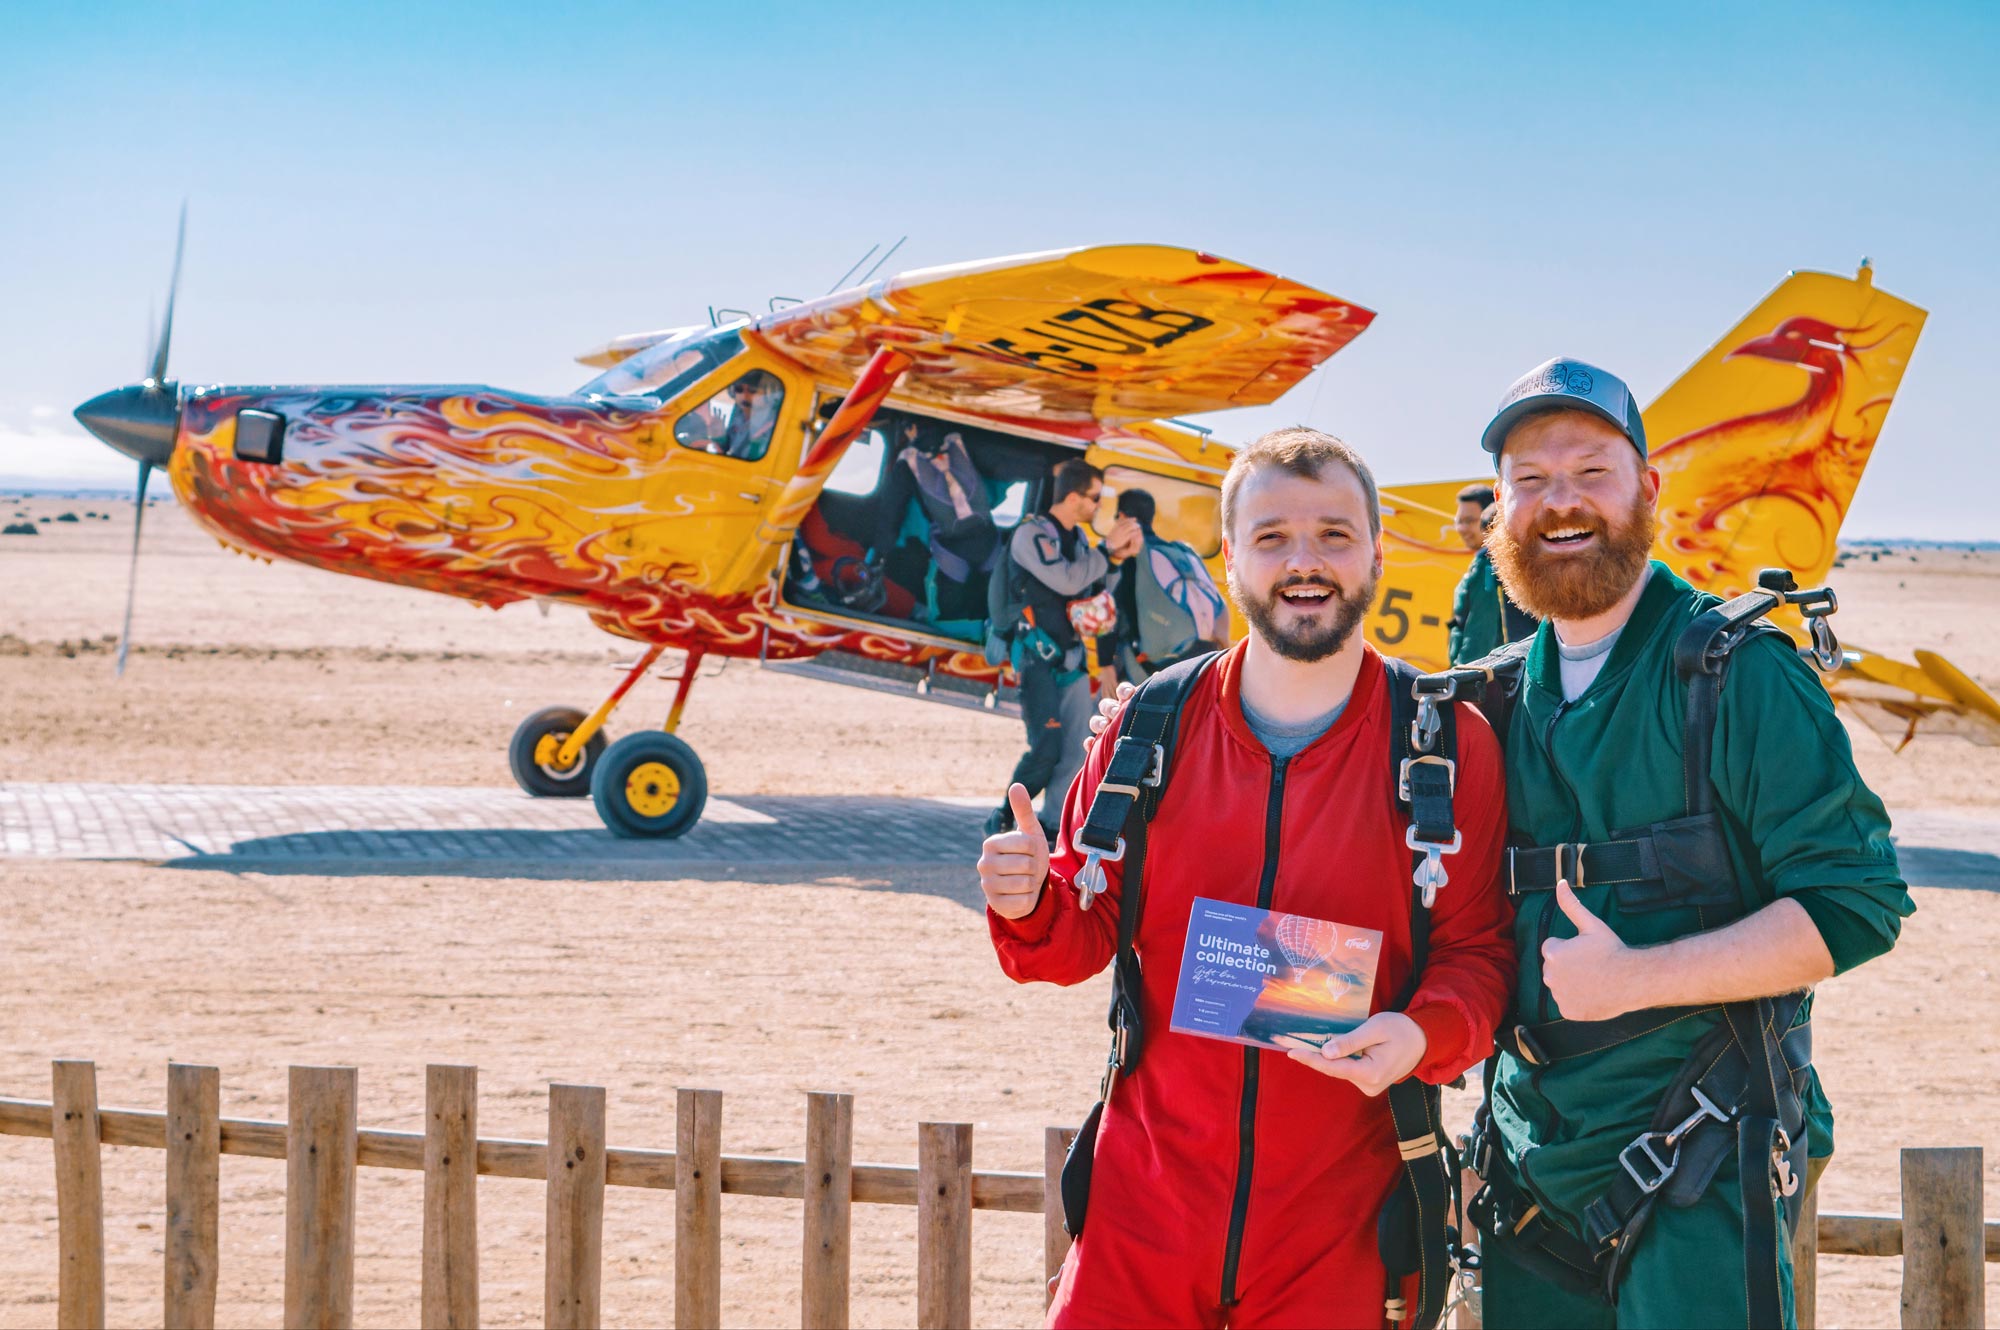 Pure adrenaline! SkyDiving in Namibia over the Dessert in Africa